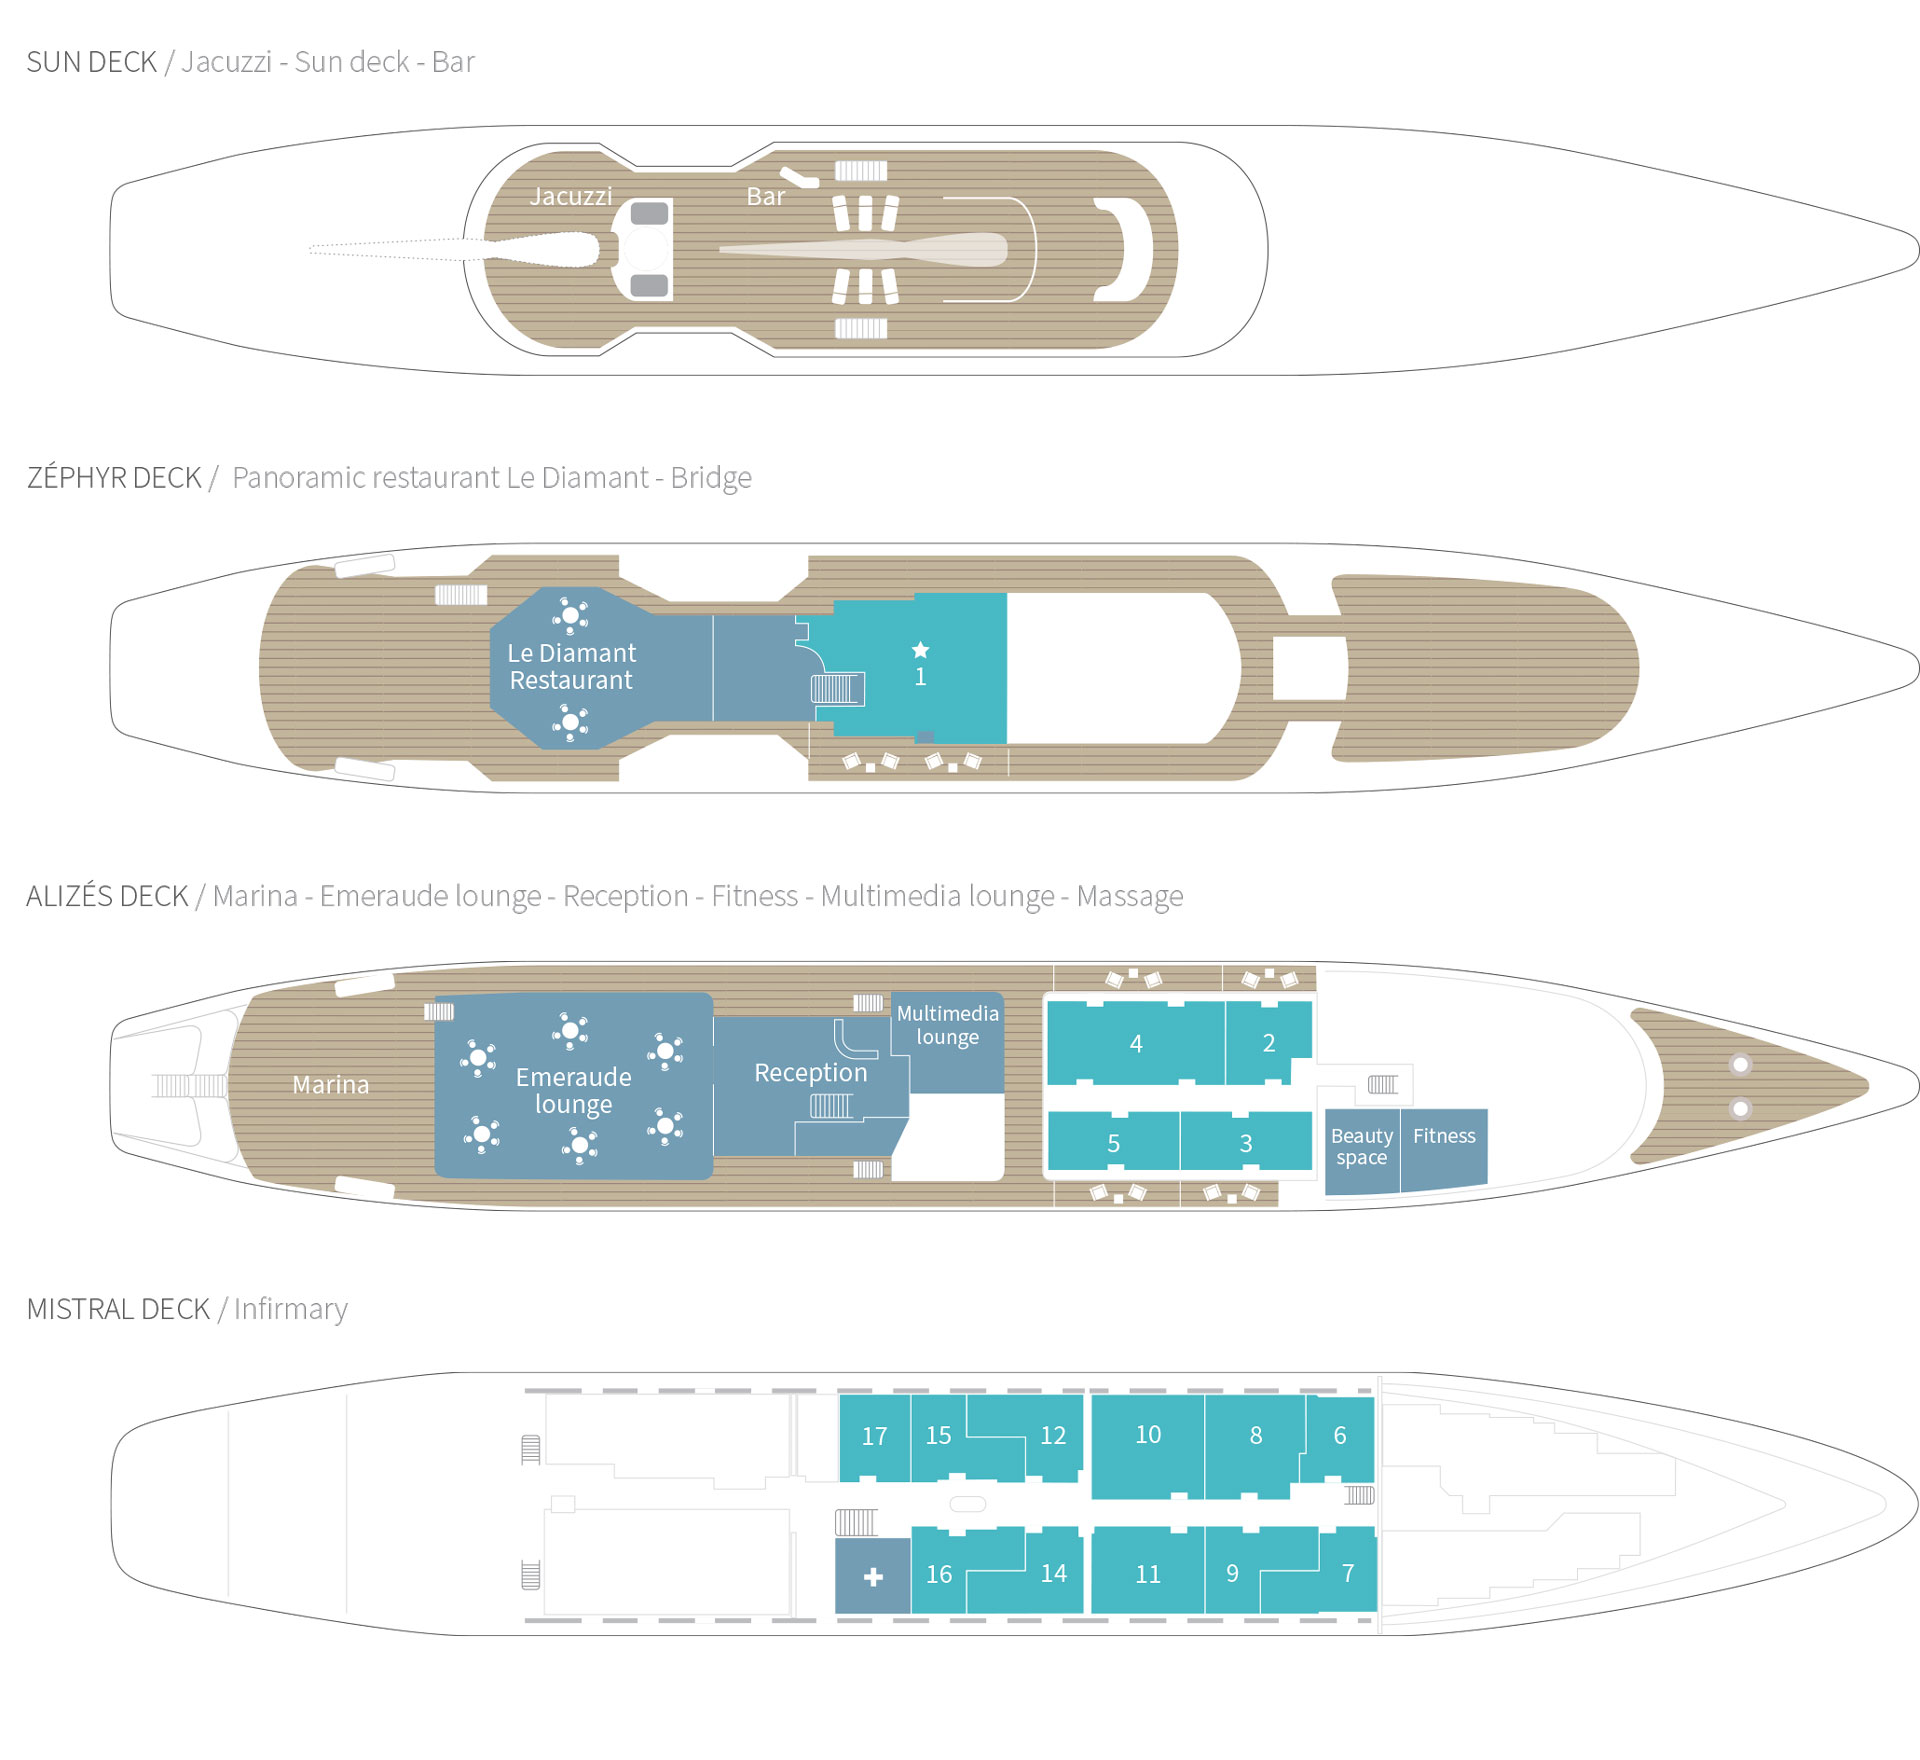 Deck plan of Le Ponant cruise ship with 4 passenger decks, 16 cabins spread across 3 decks & a lot of open-air spaces.